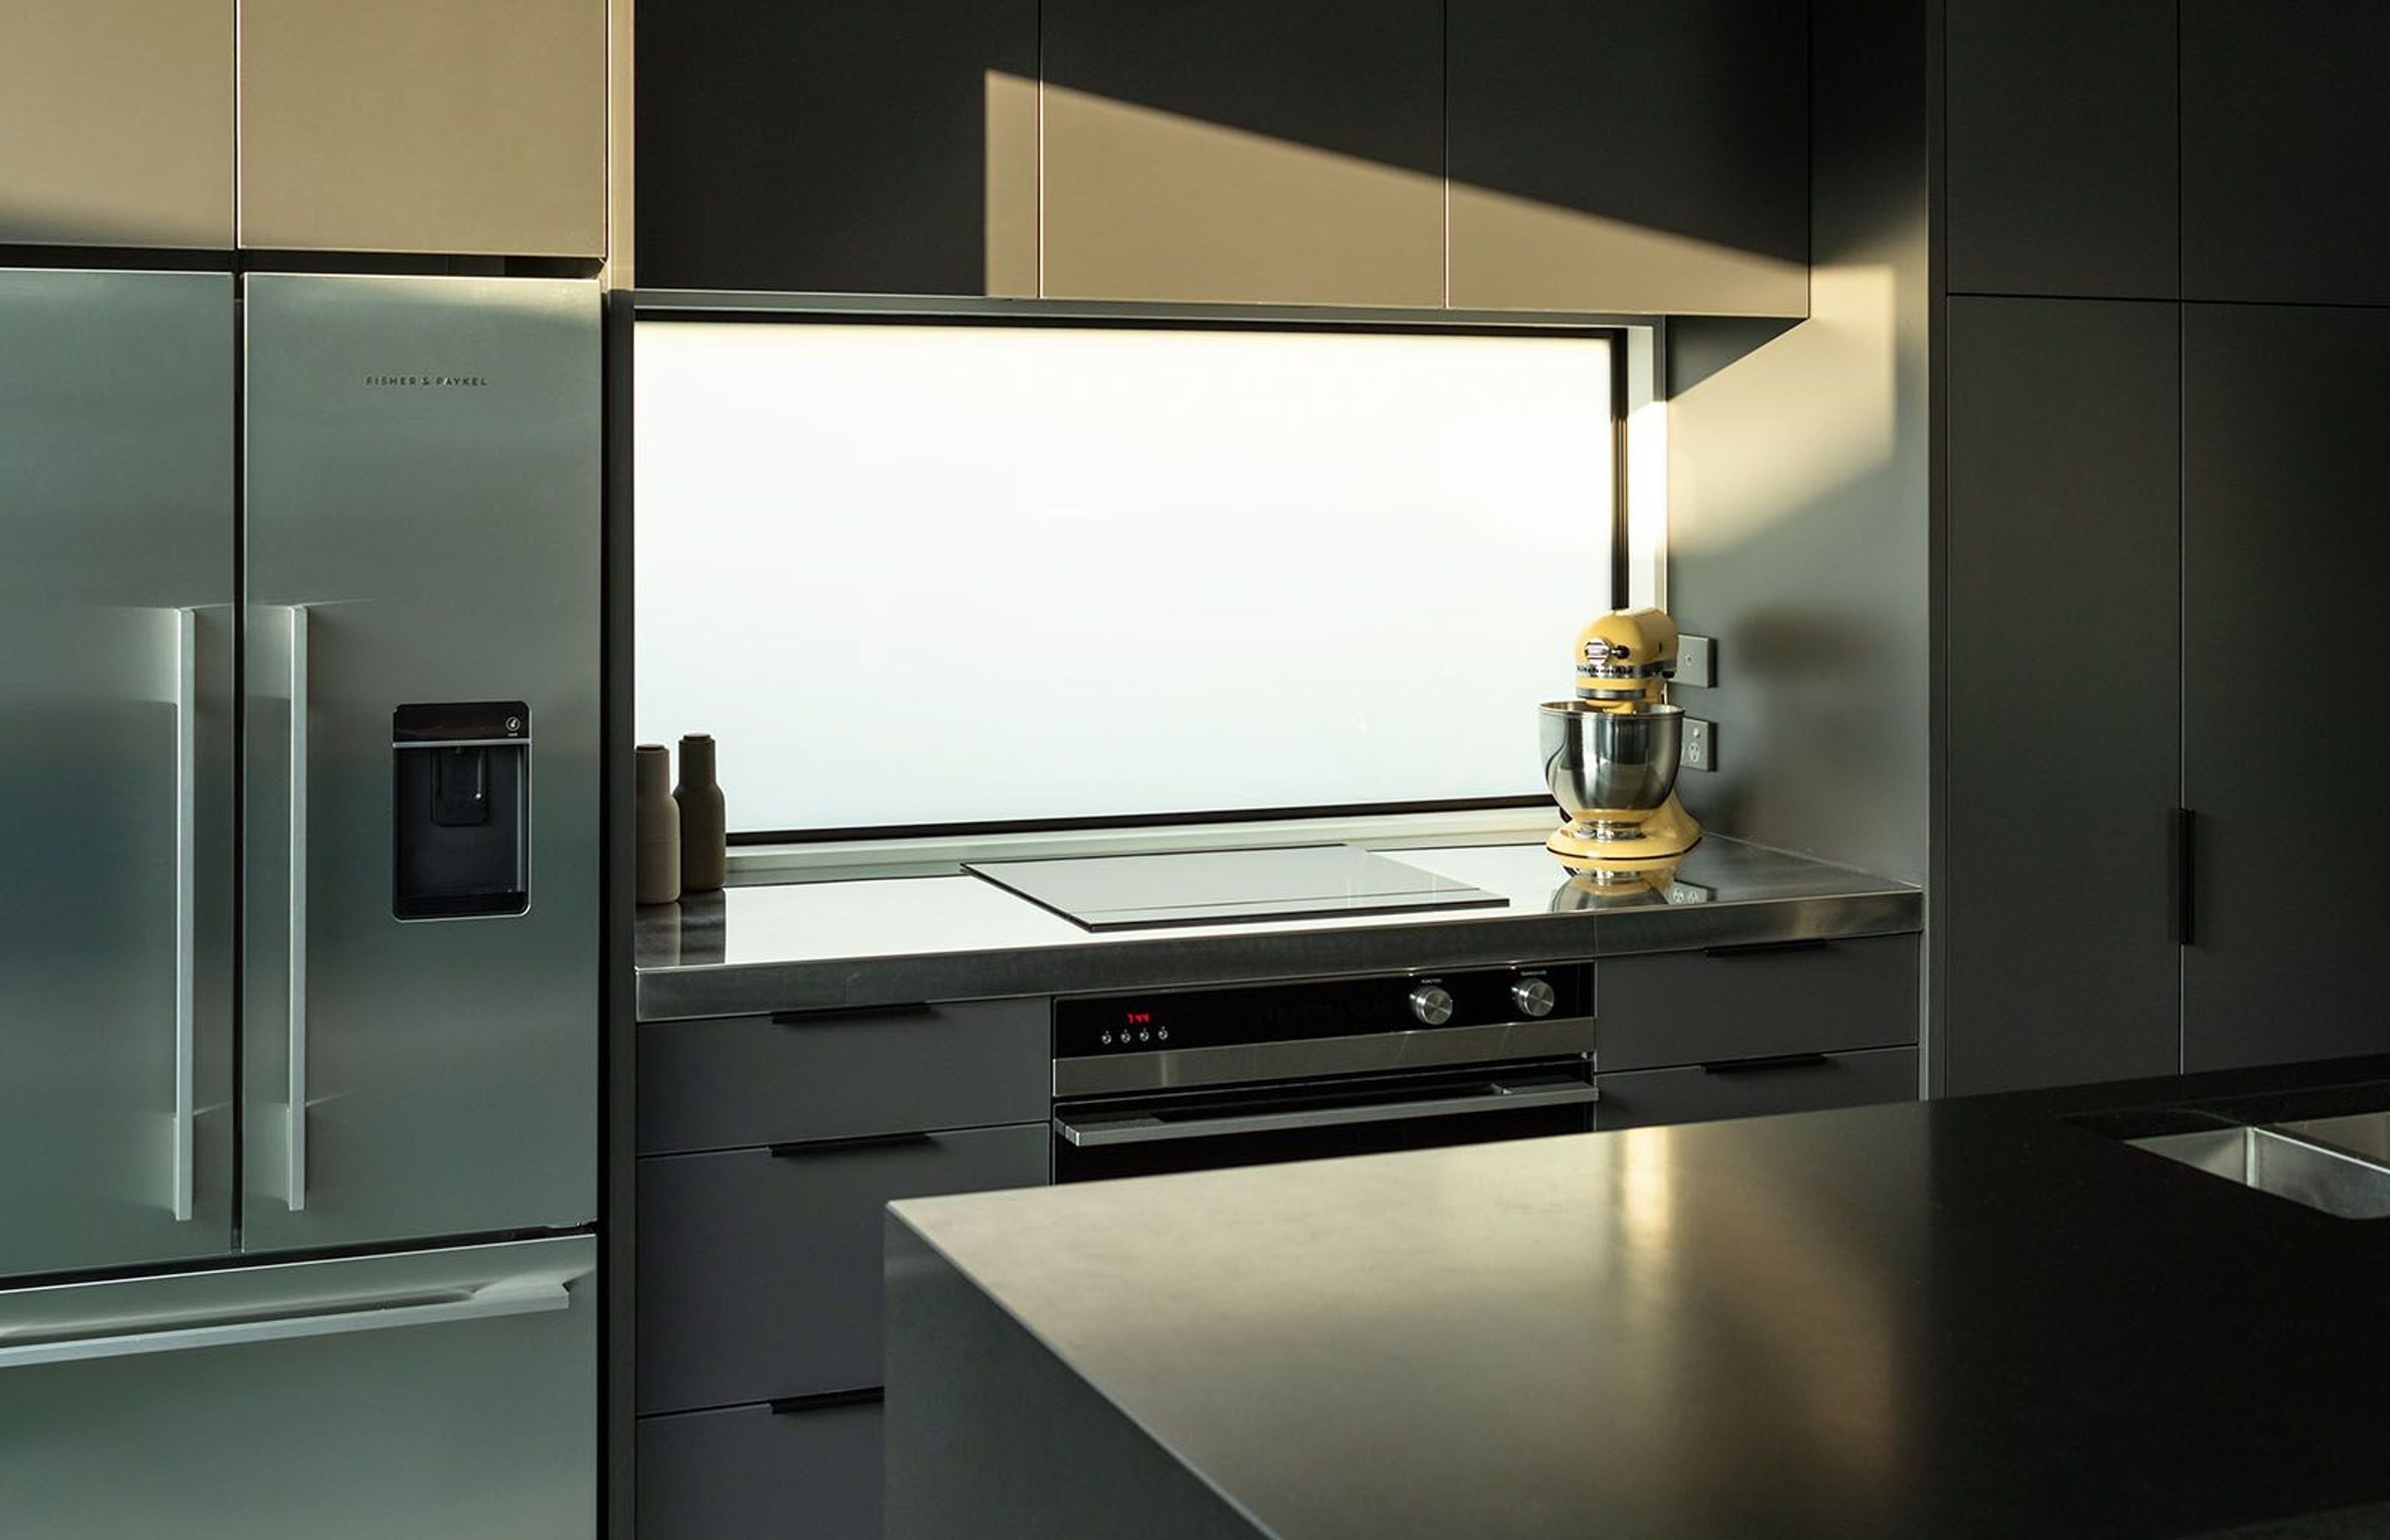 A reflective splashback and stone benchtop are complemented by Fisher &amp; Paykel appliances.